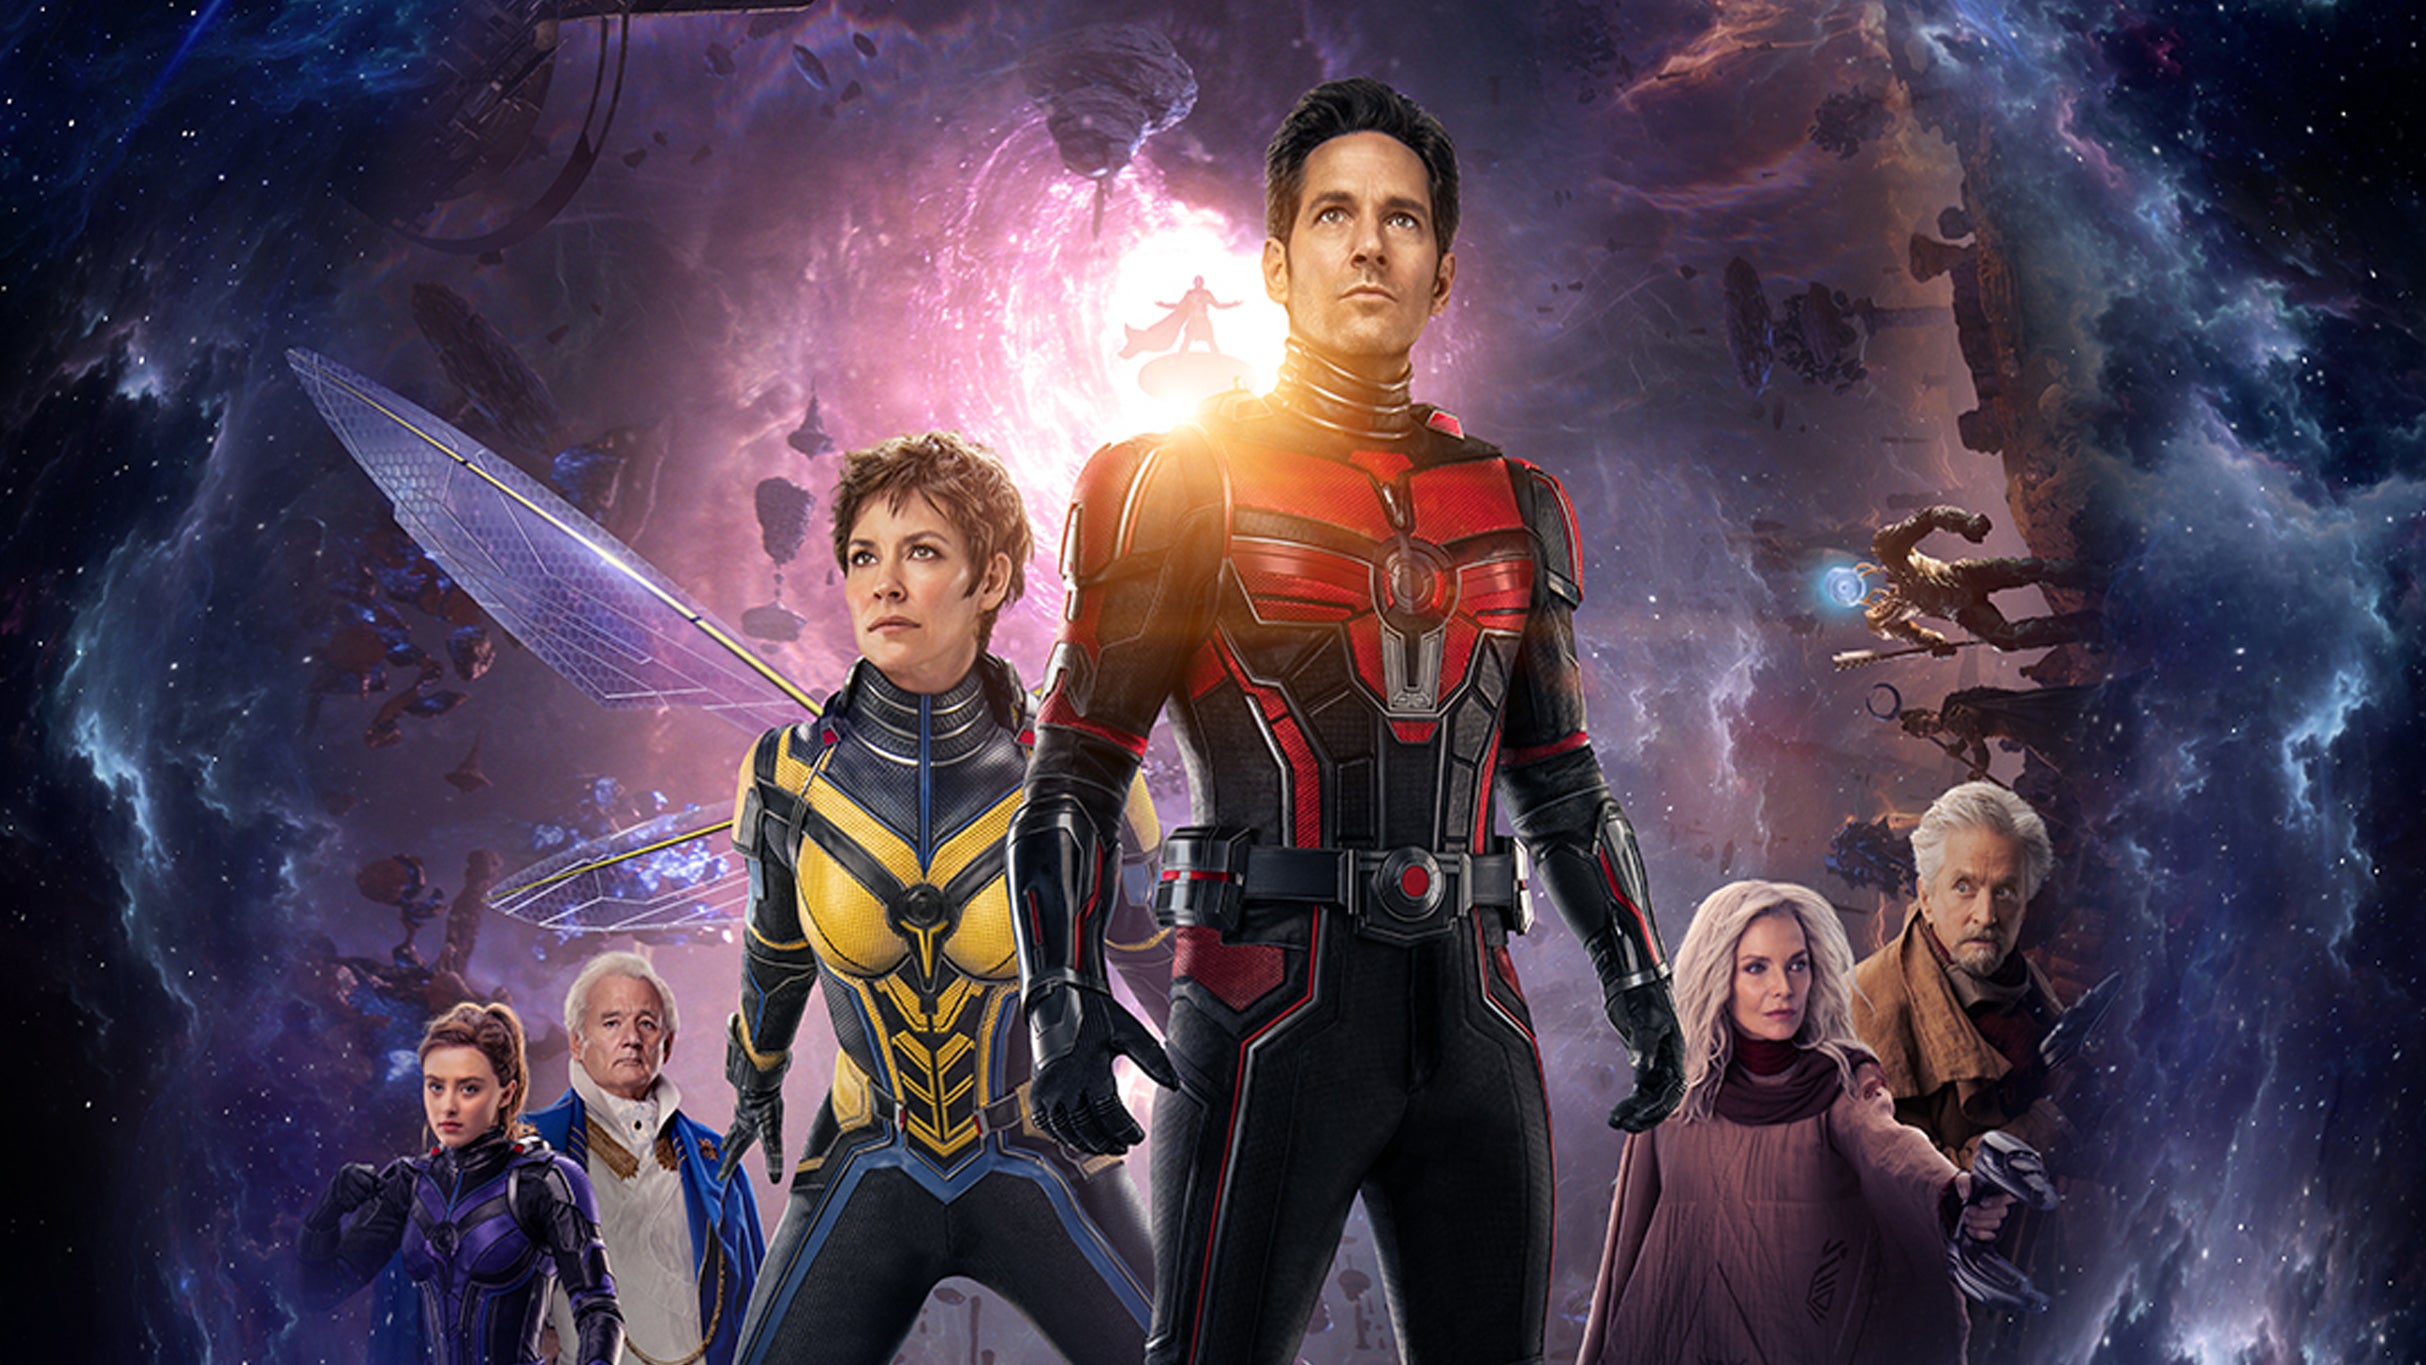 Ant-Man and the Wasp: Quantumania (2023) Featured Image | Courtesy of Disney/Marvel Studios